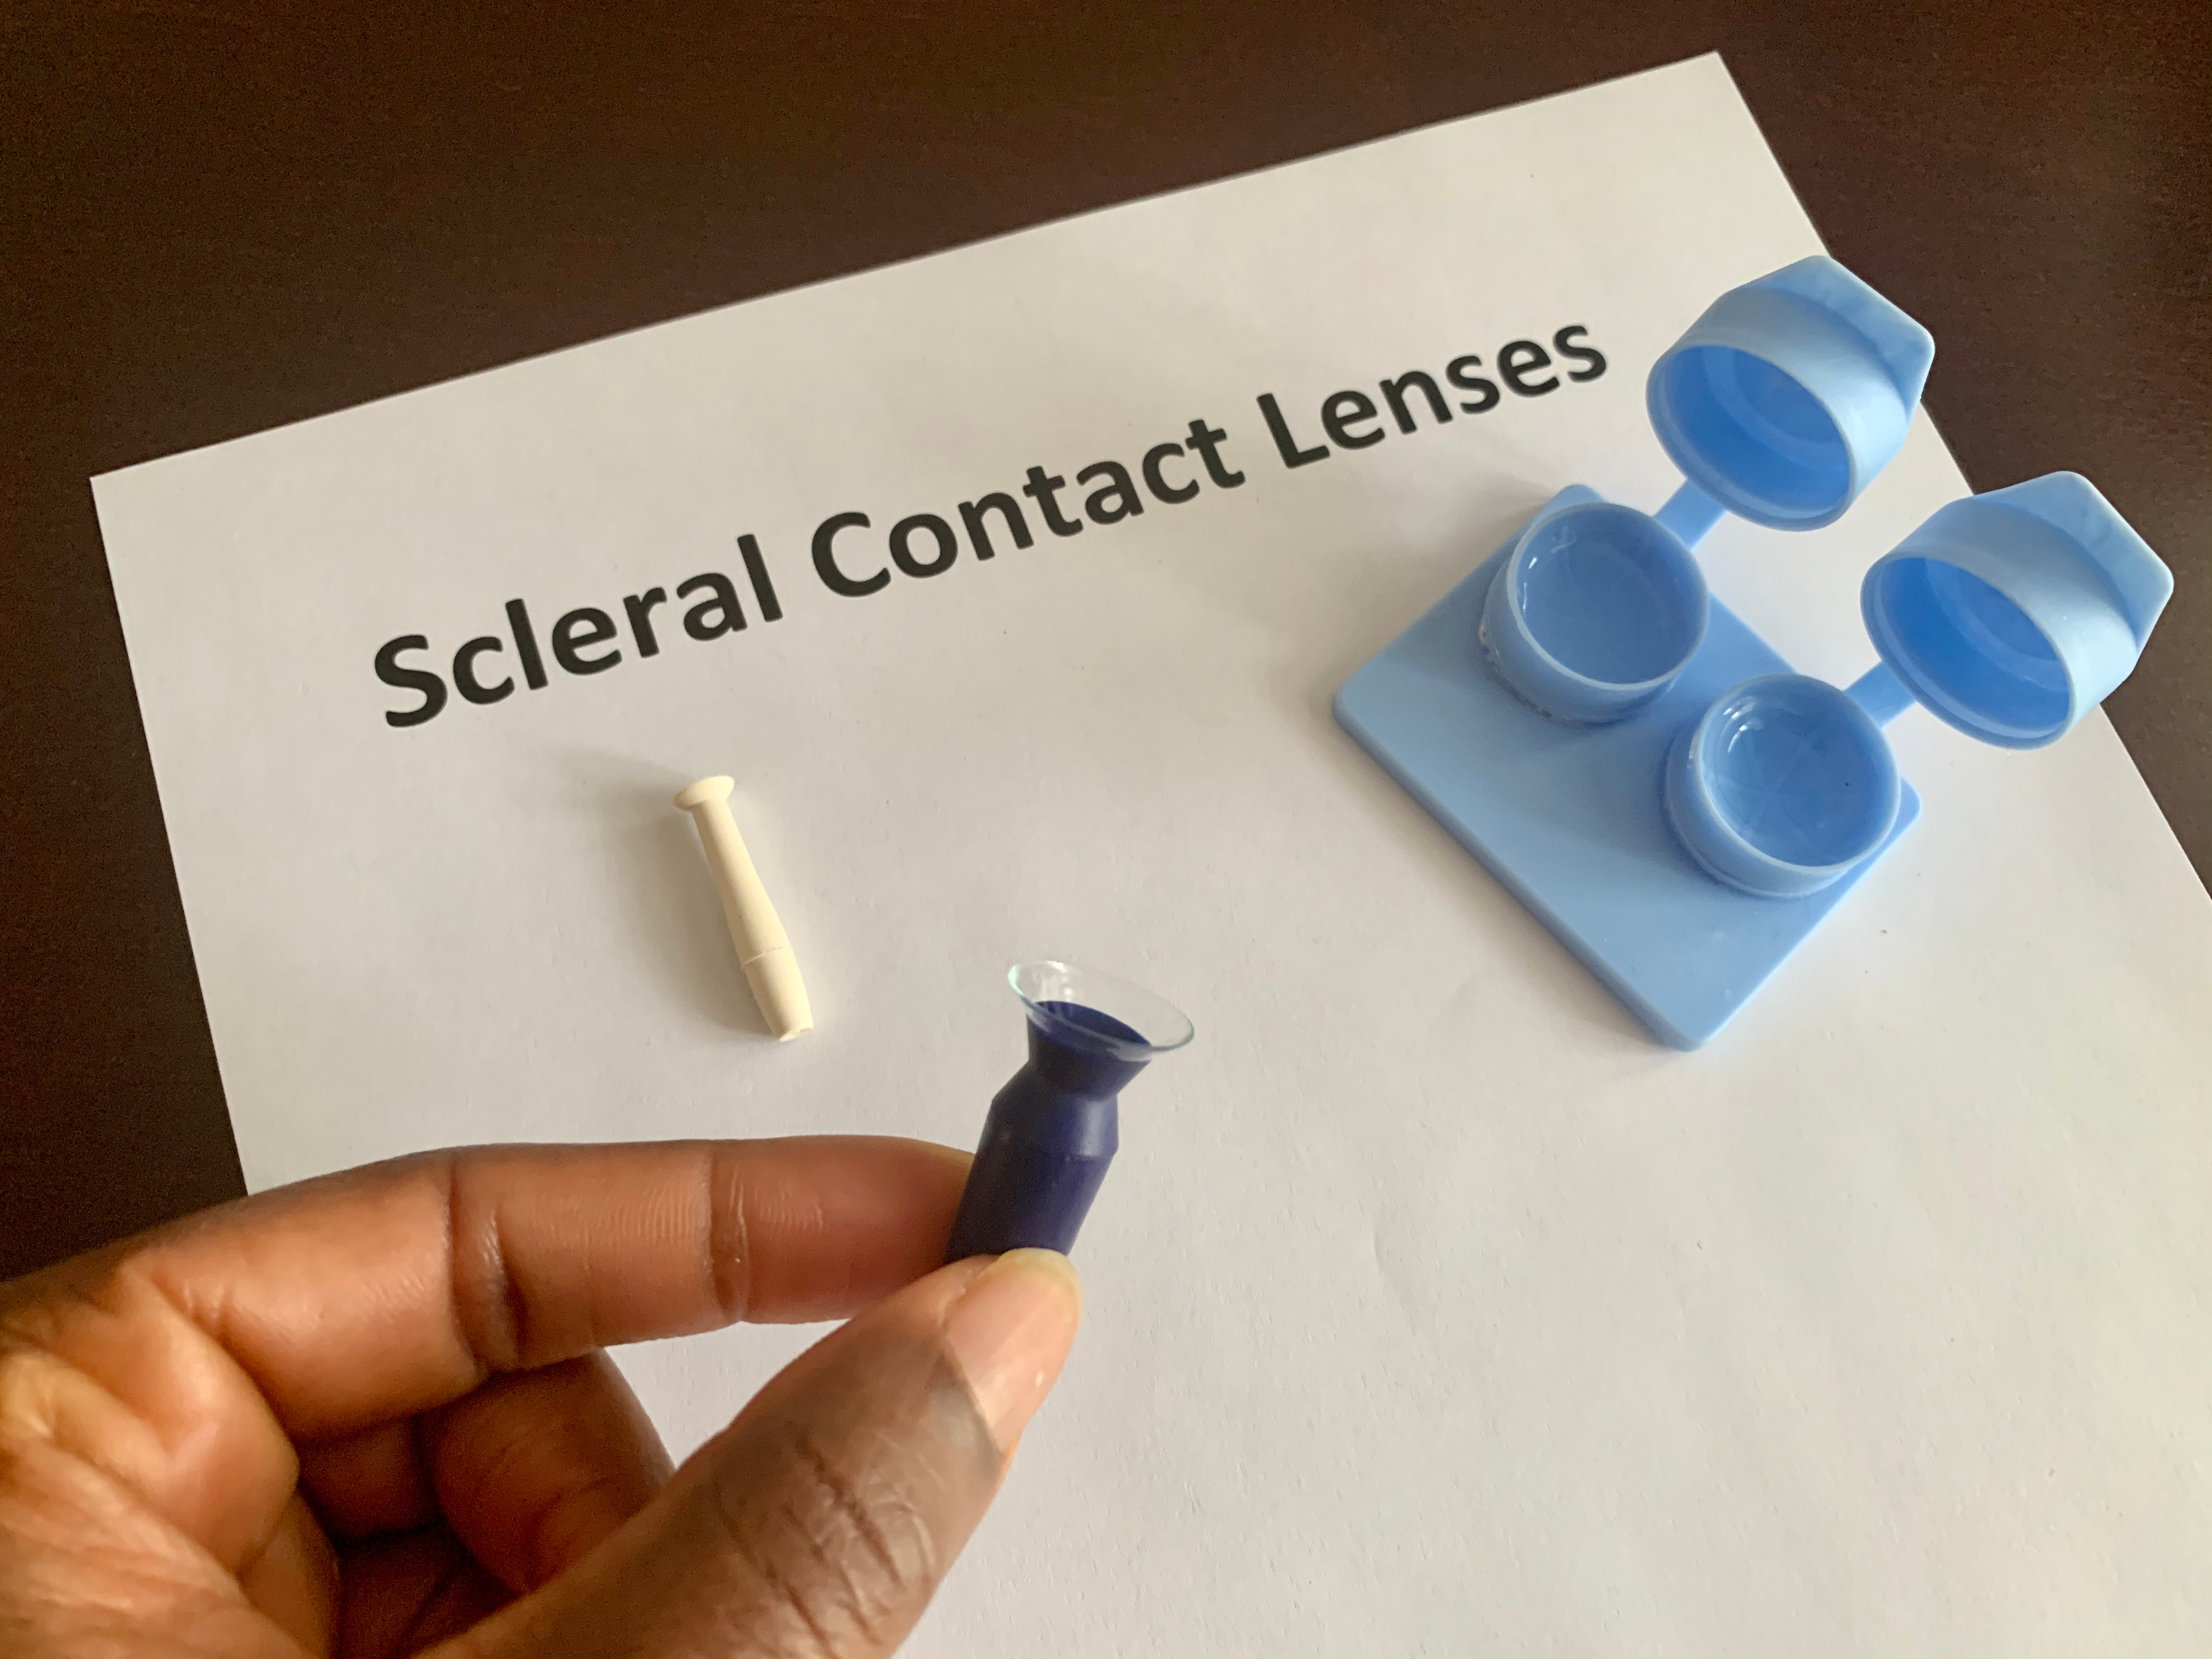 Scleral contact lenses, example of scleral contact lens